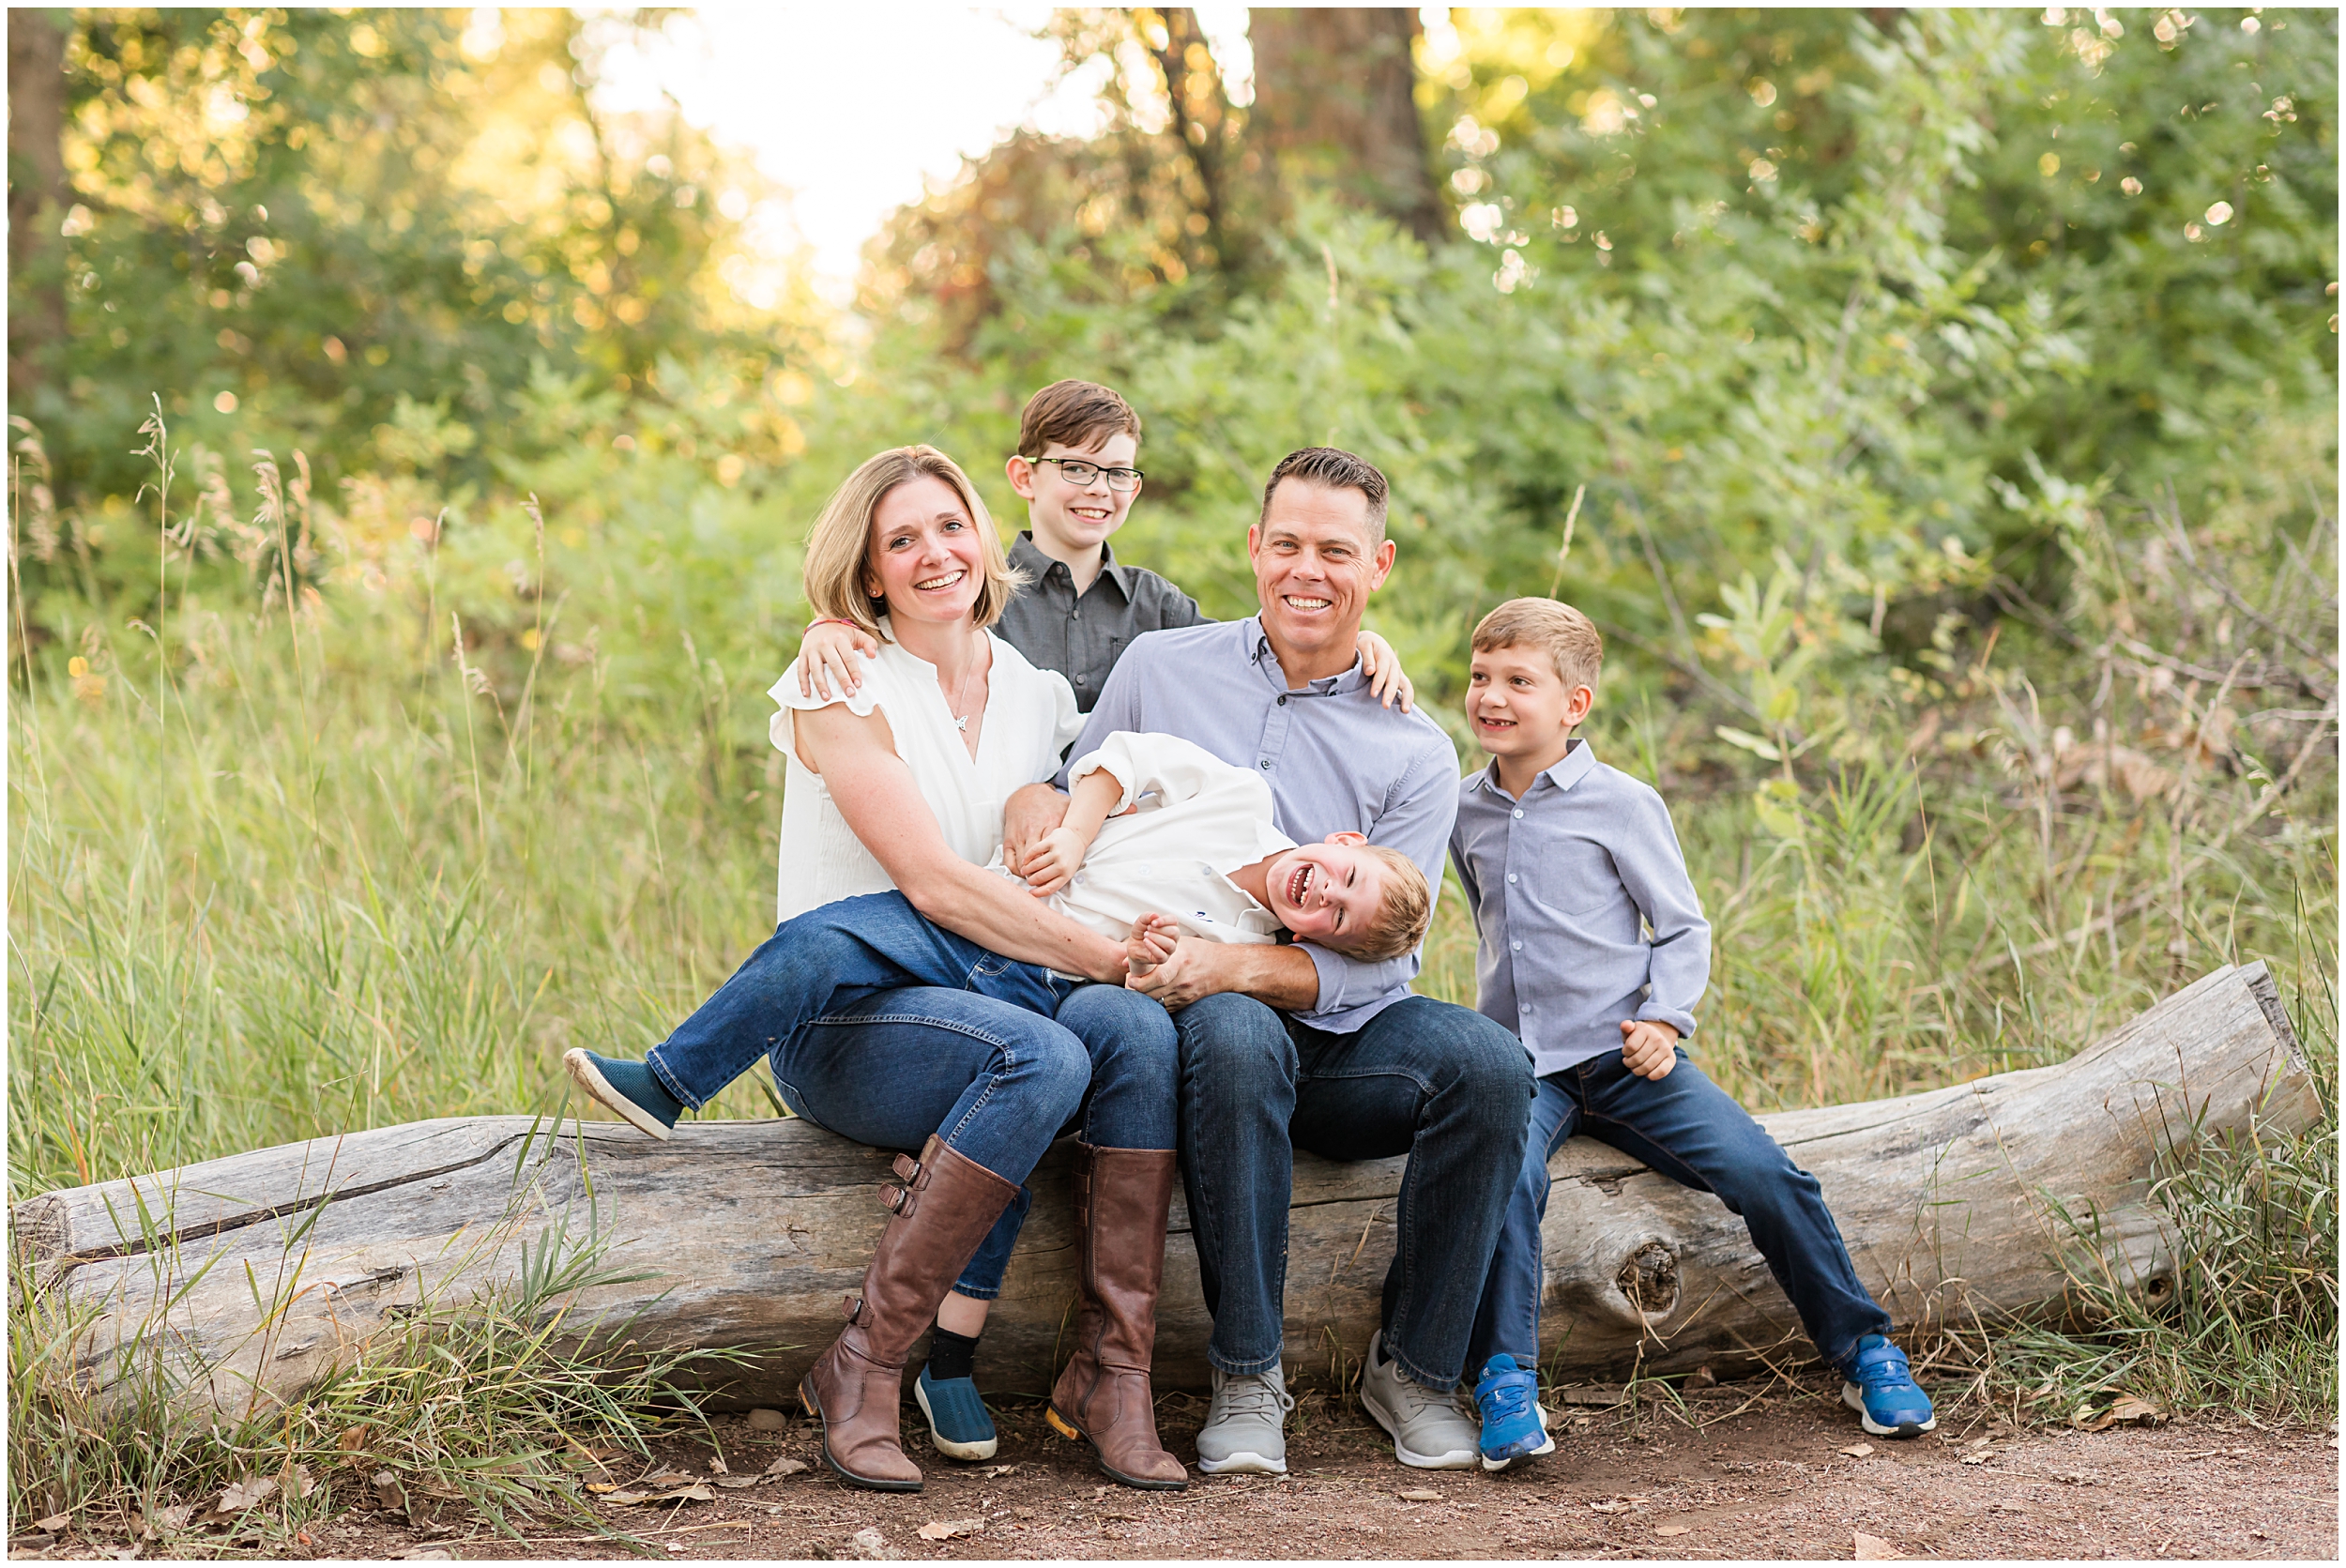 The Gamet’s Mini Family Session at McKay Lake | Erie Family Photography